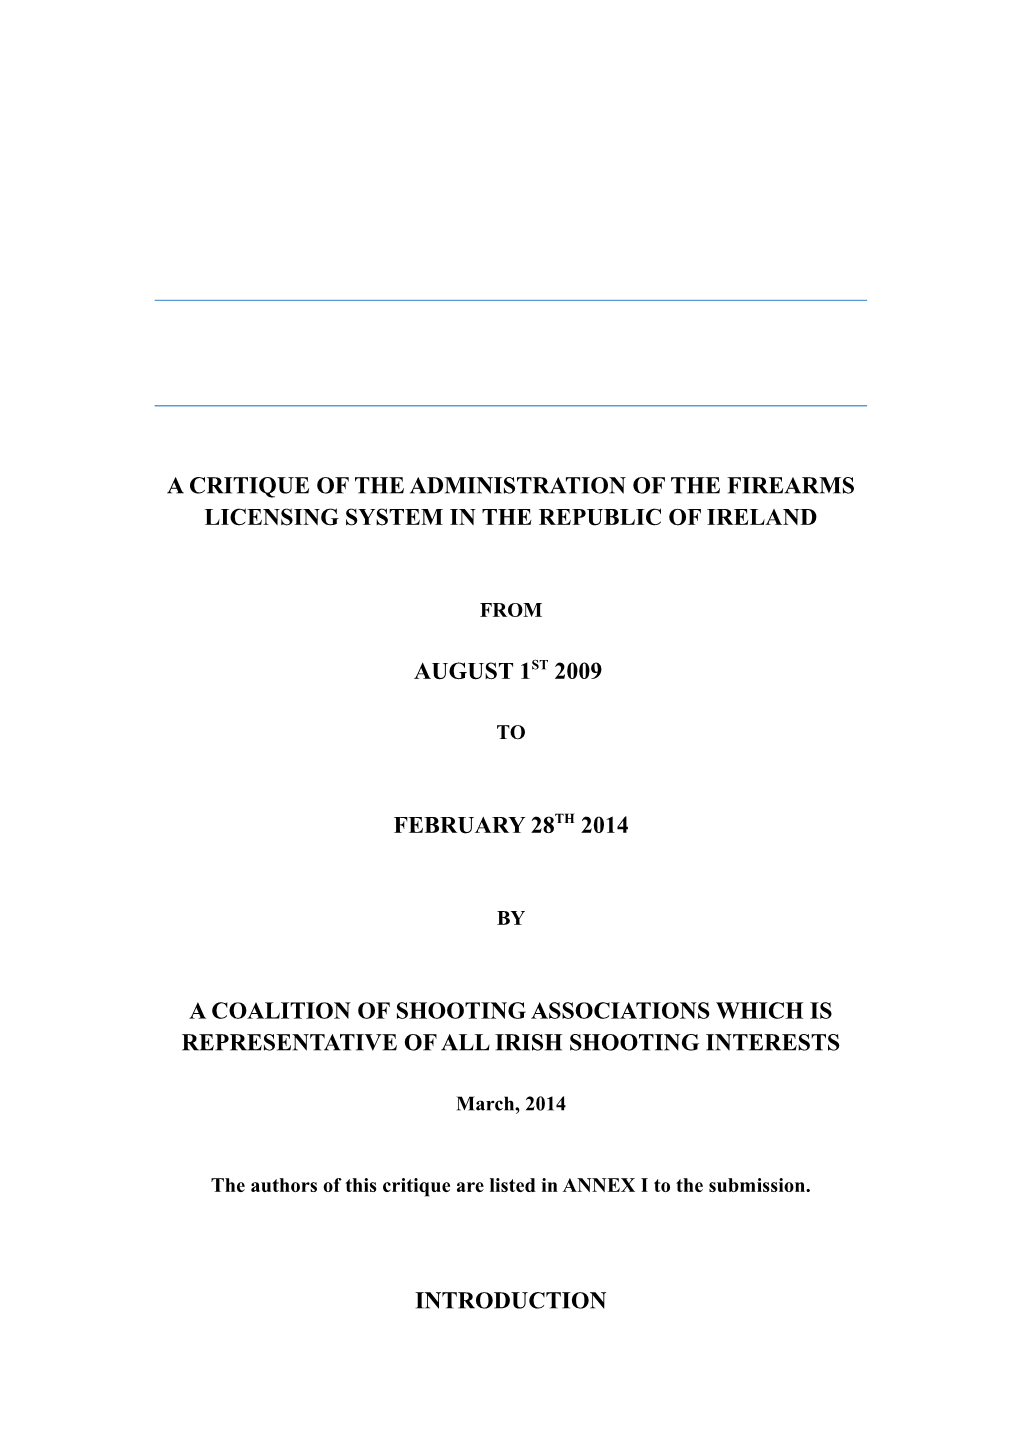 A Critique of the Administration of the Firearms Licensing System in the Republic of Ireland